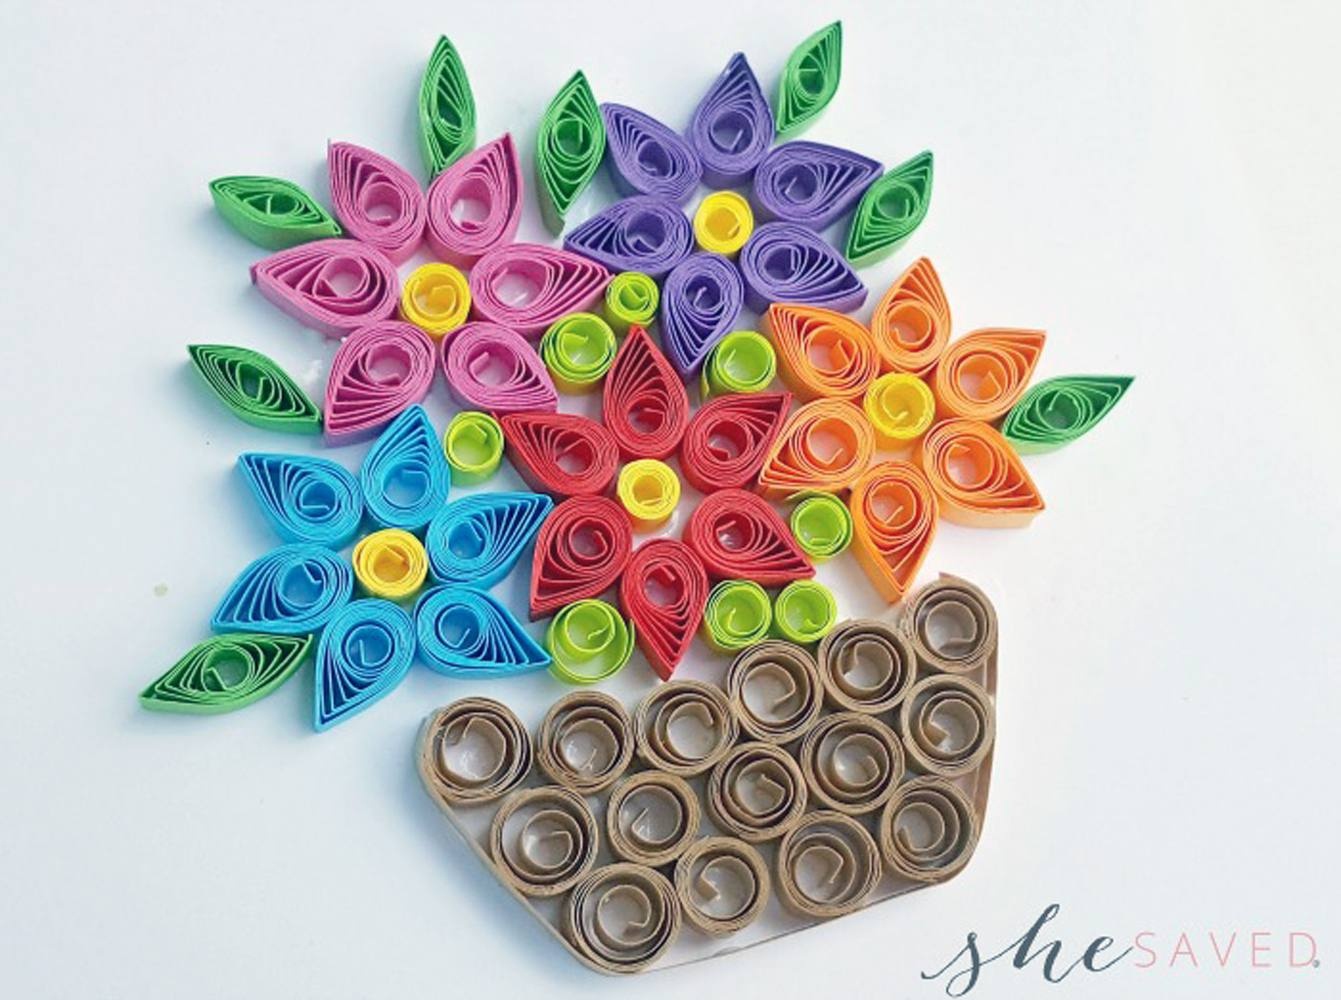 11 Paper Quilling Patterns For Beginners - Free Printable Quilling Patterns